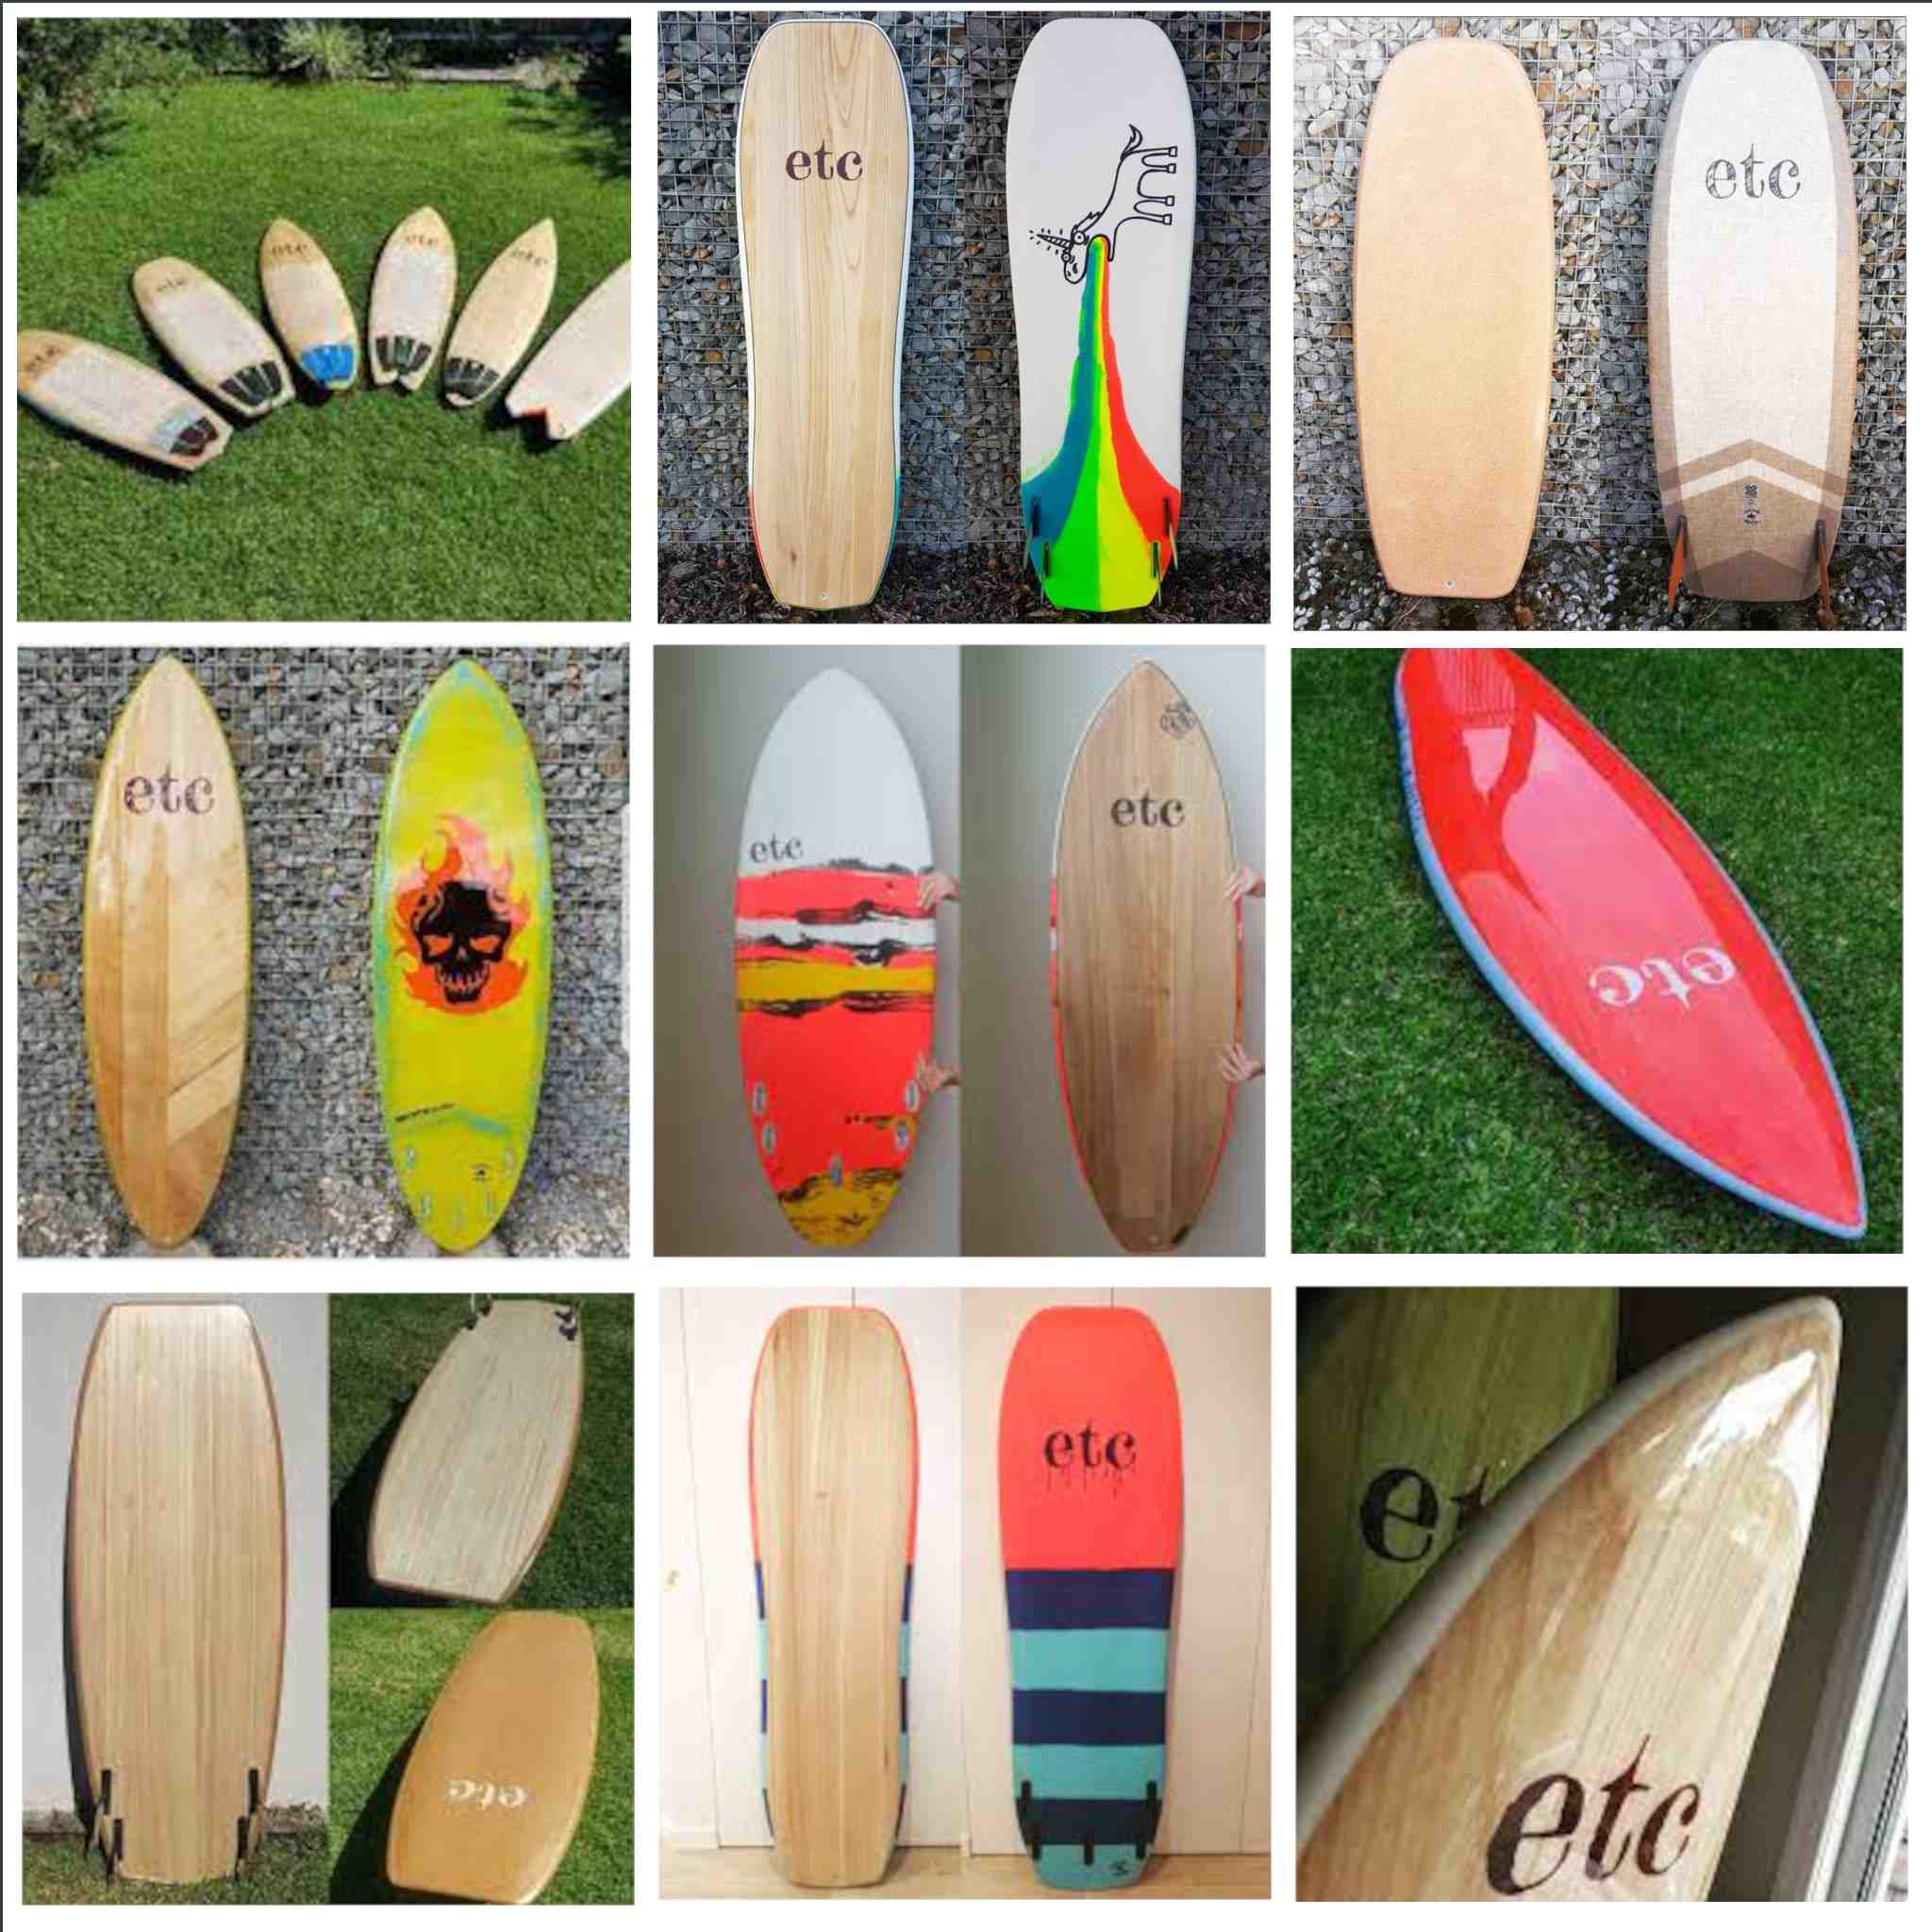 How are surfboards disposed of?